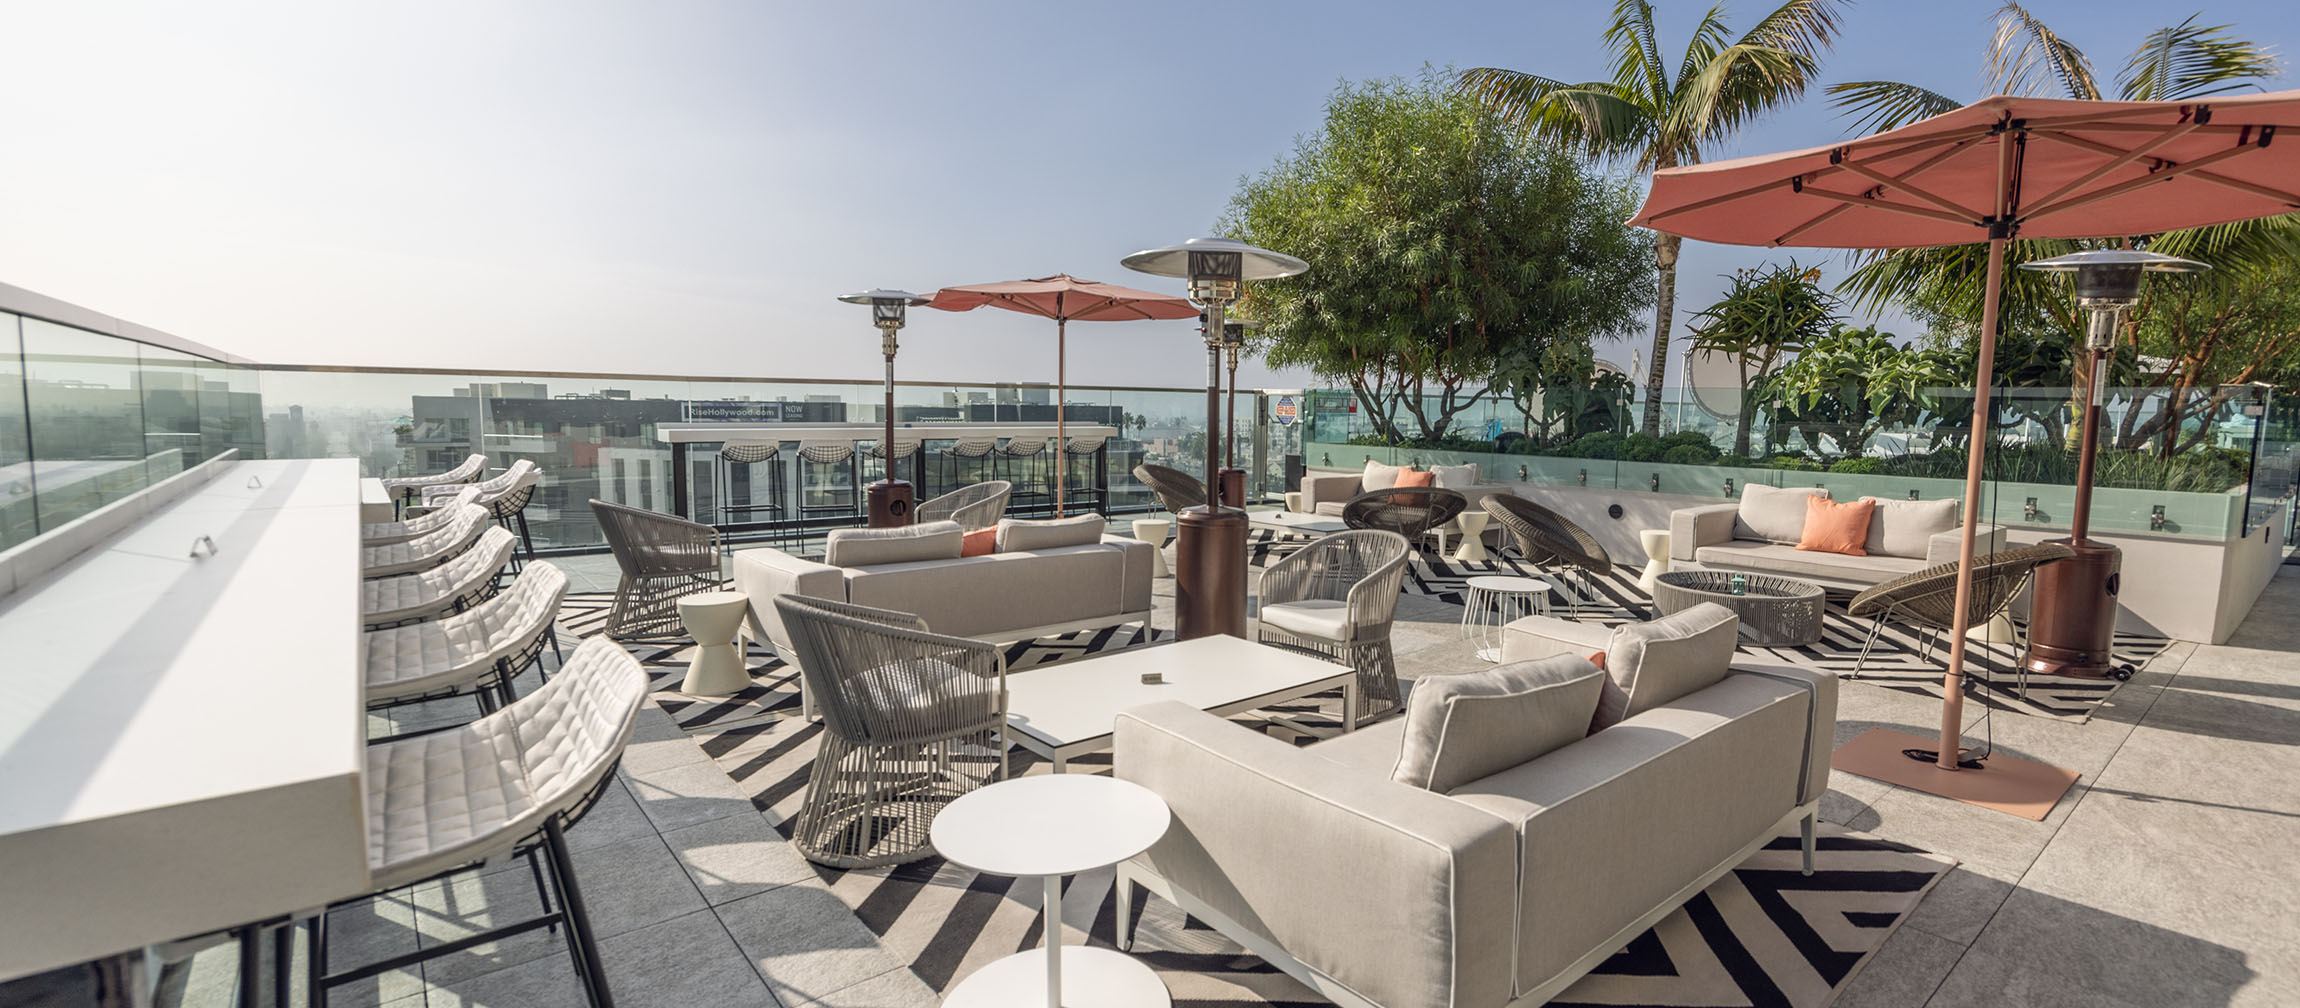 Hotels with Rooftop Bar in Los Angeles